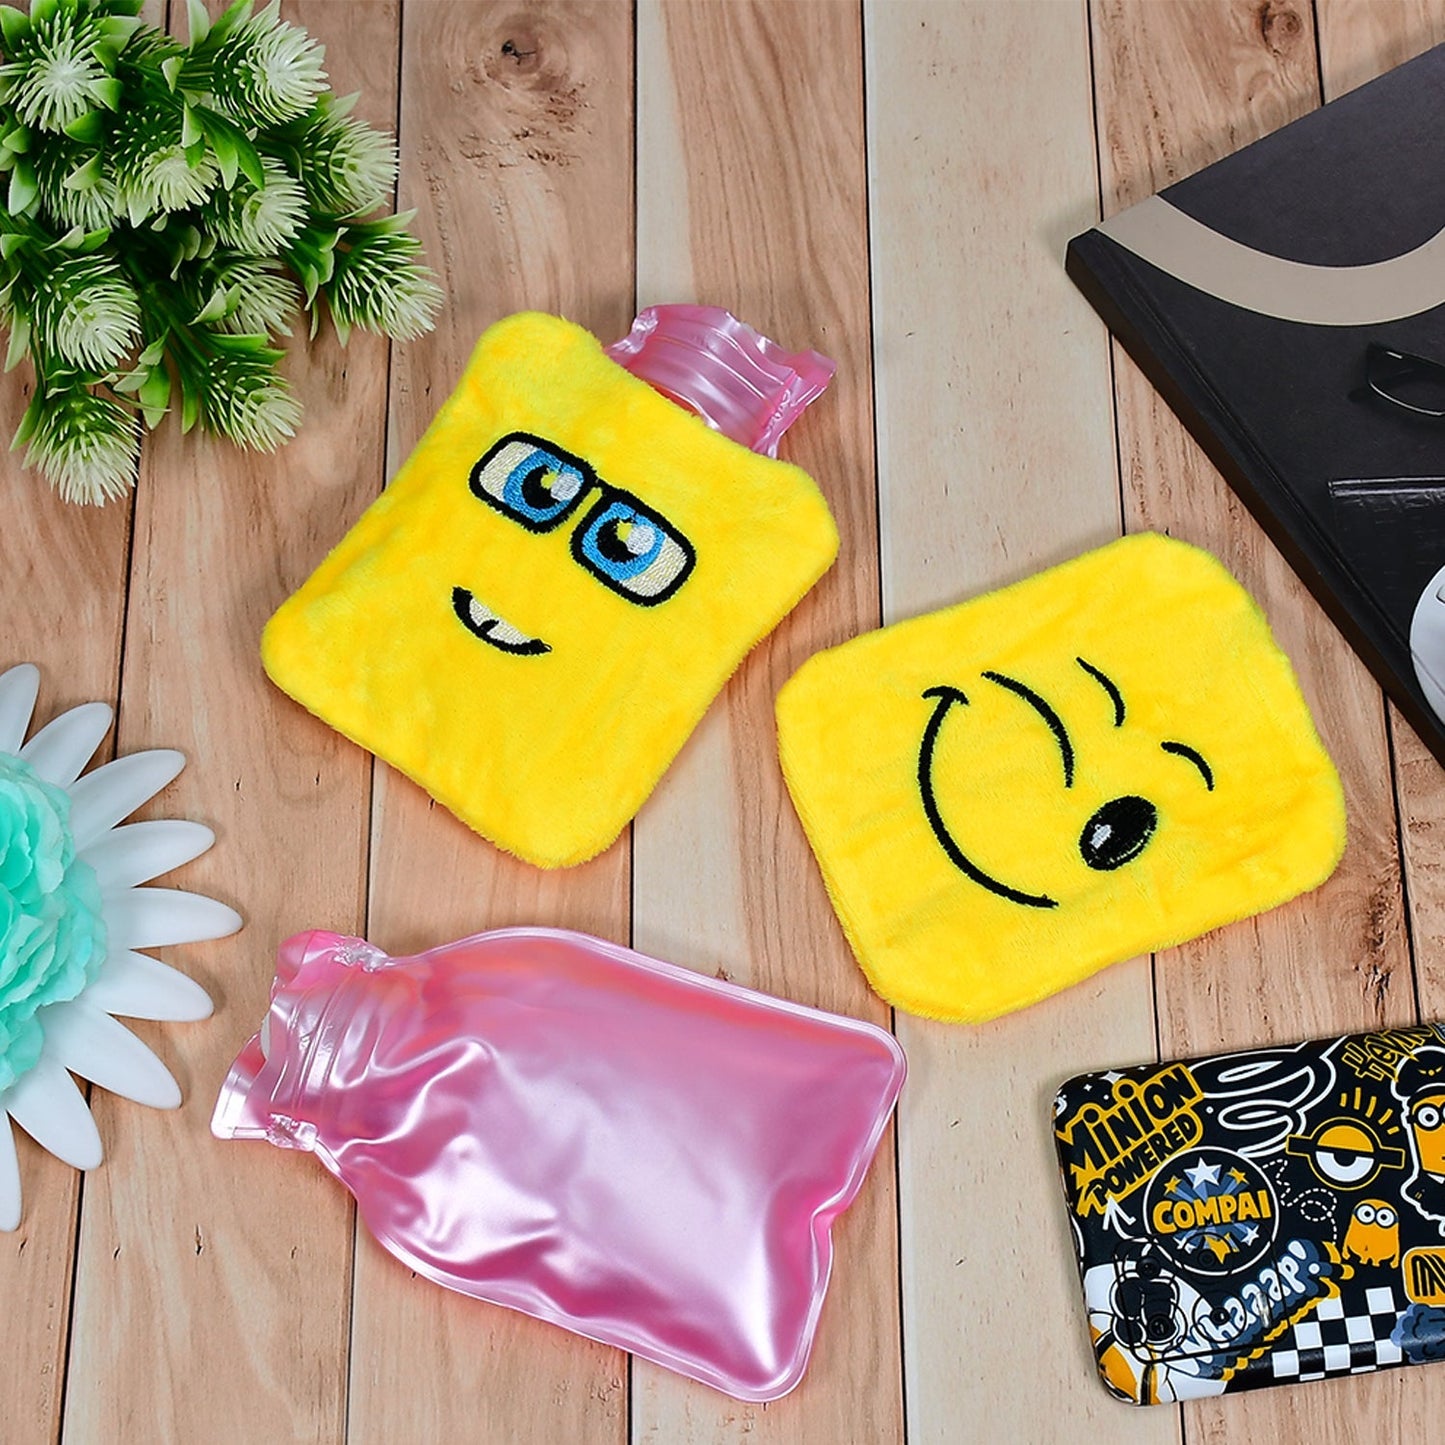 6535 1pc Mix Emoji designs small Hot Water Bag with Cover for Pain Relief, Neck, Shoulder Pain and Hand, Feet Warmer, Menstrual Cramps. DeoDap